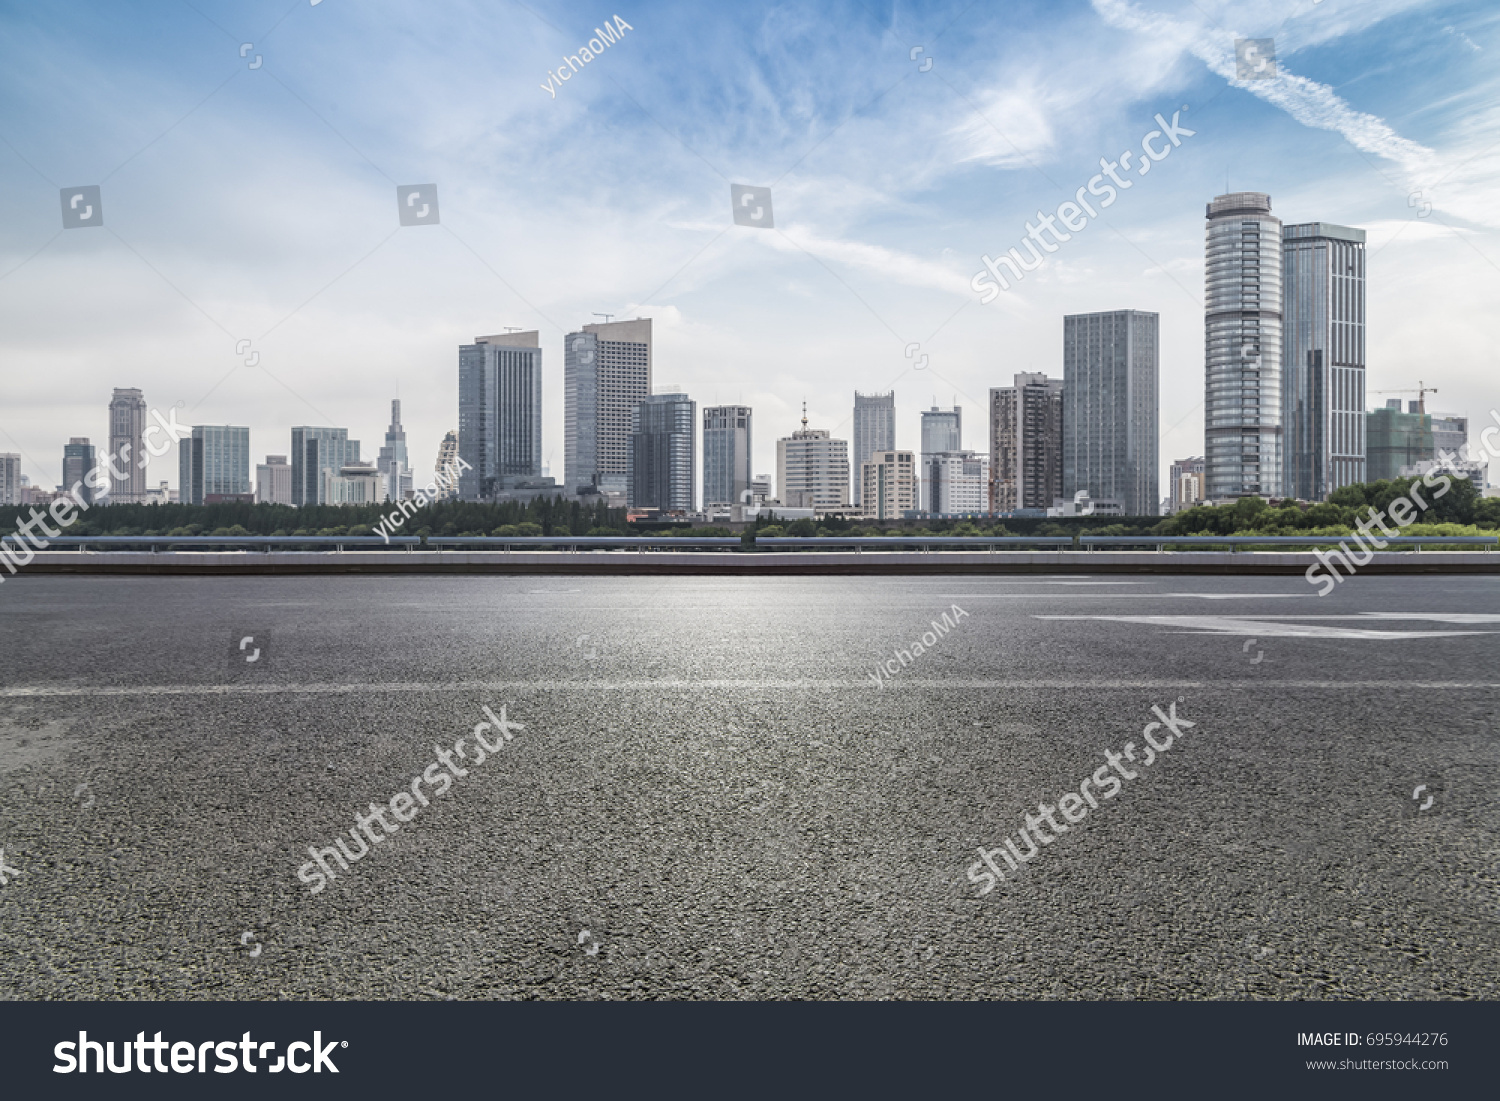 Panoramic skyline and buildings with empty road
 #695944276